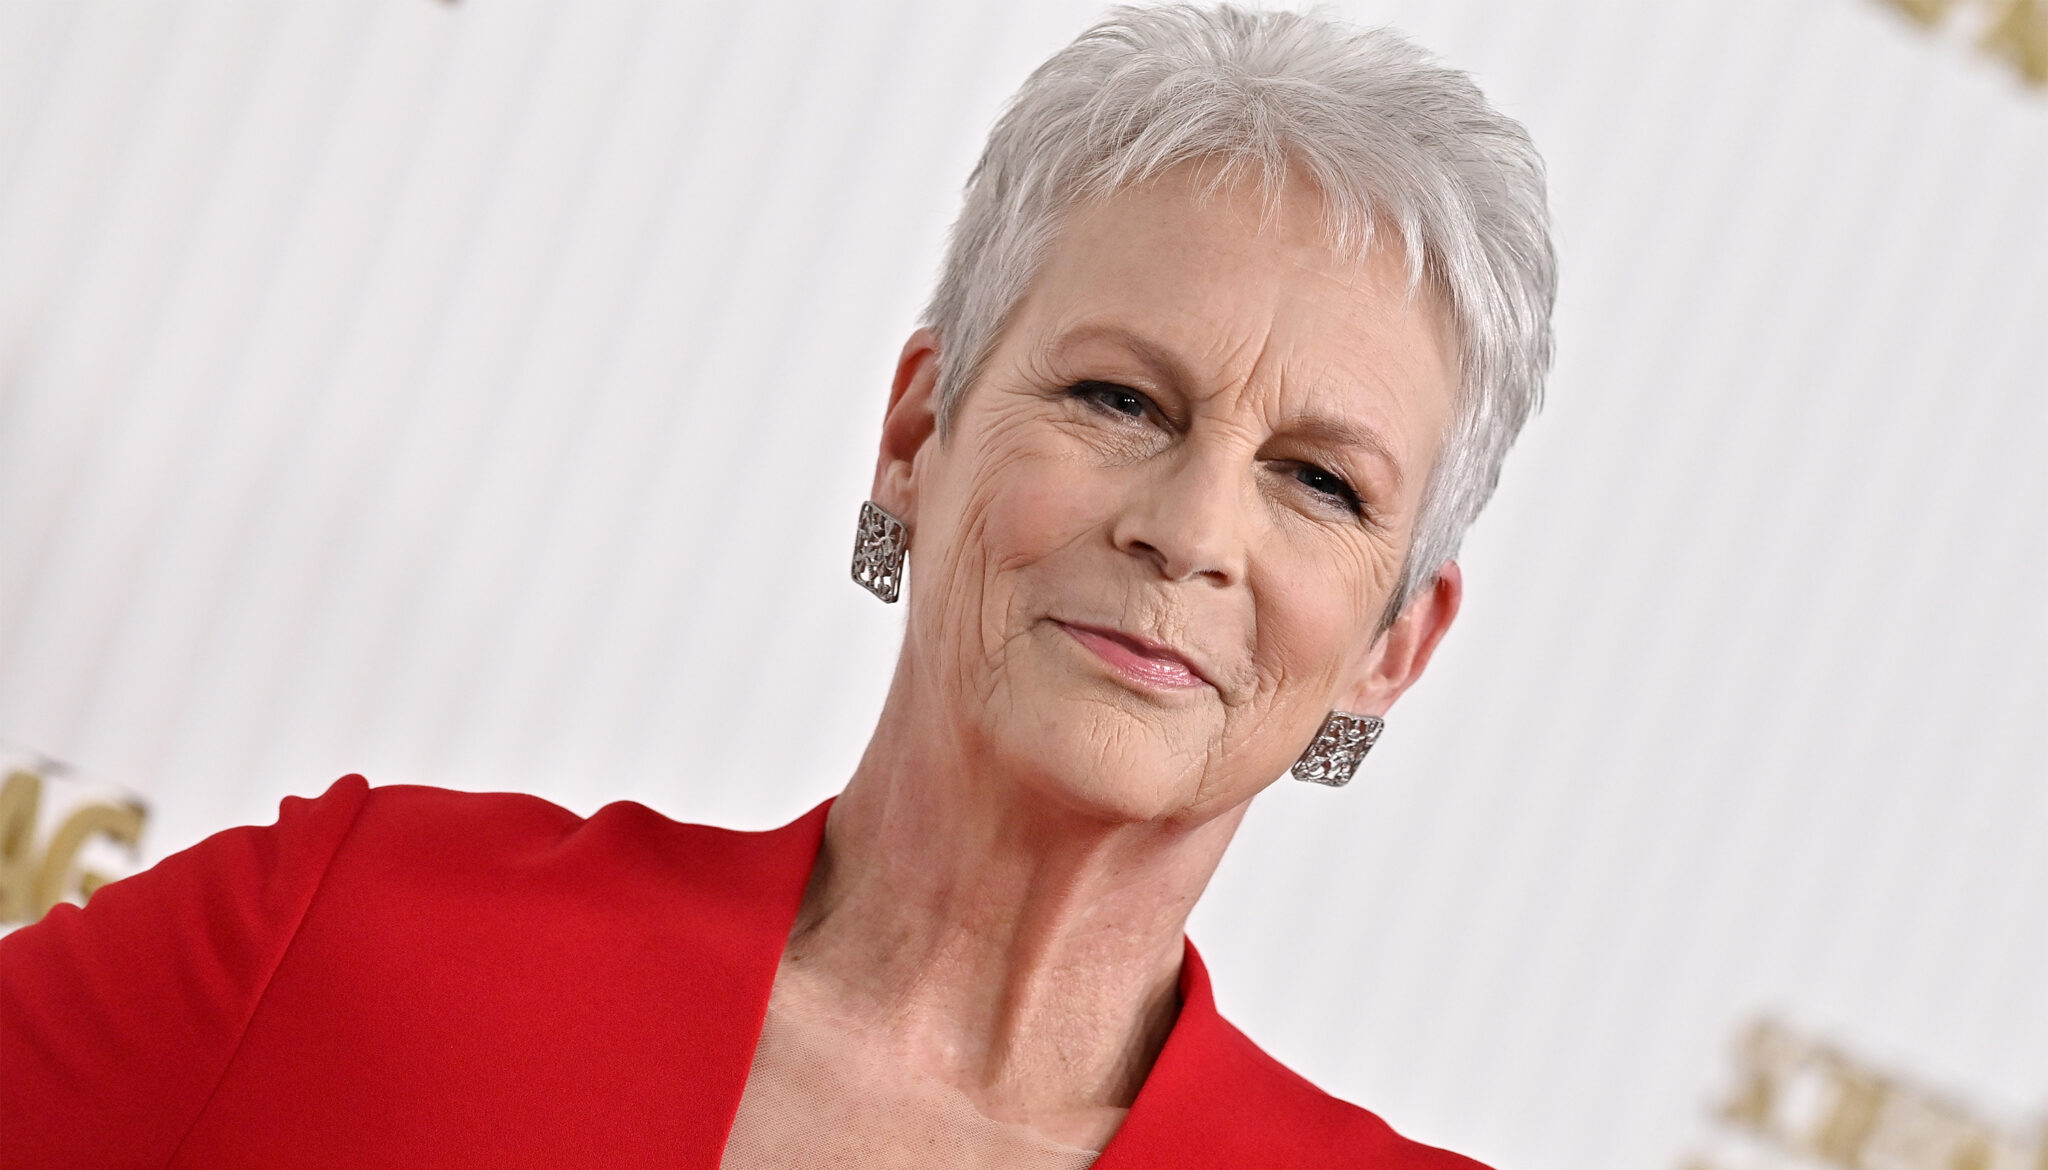 The Vitamin C Facial Oil Jamie Lee Curtis Wore to the SAG Awards